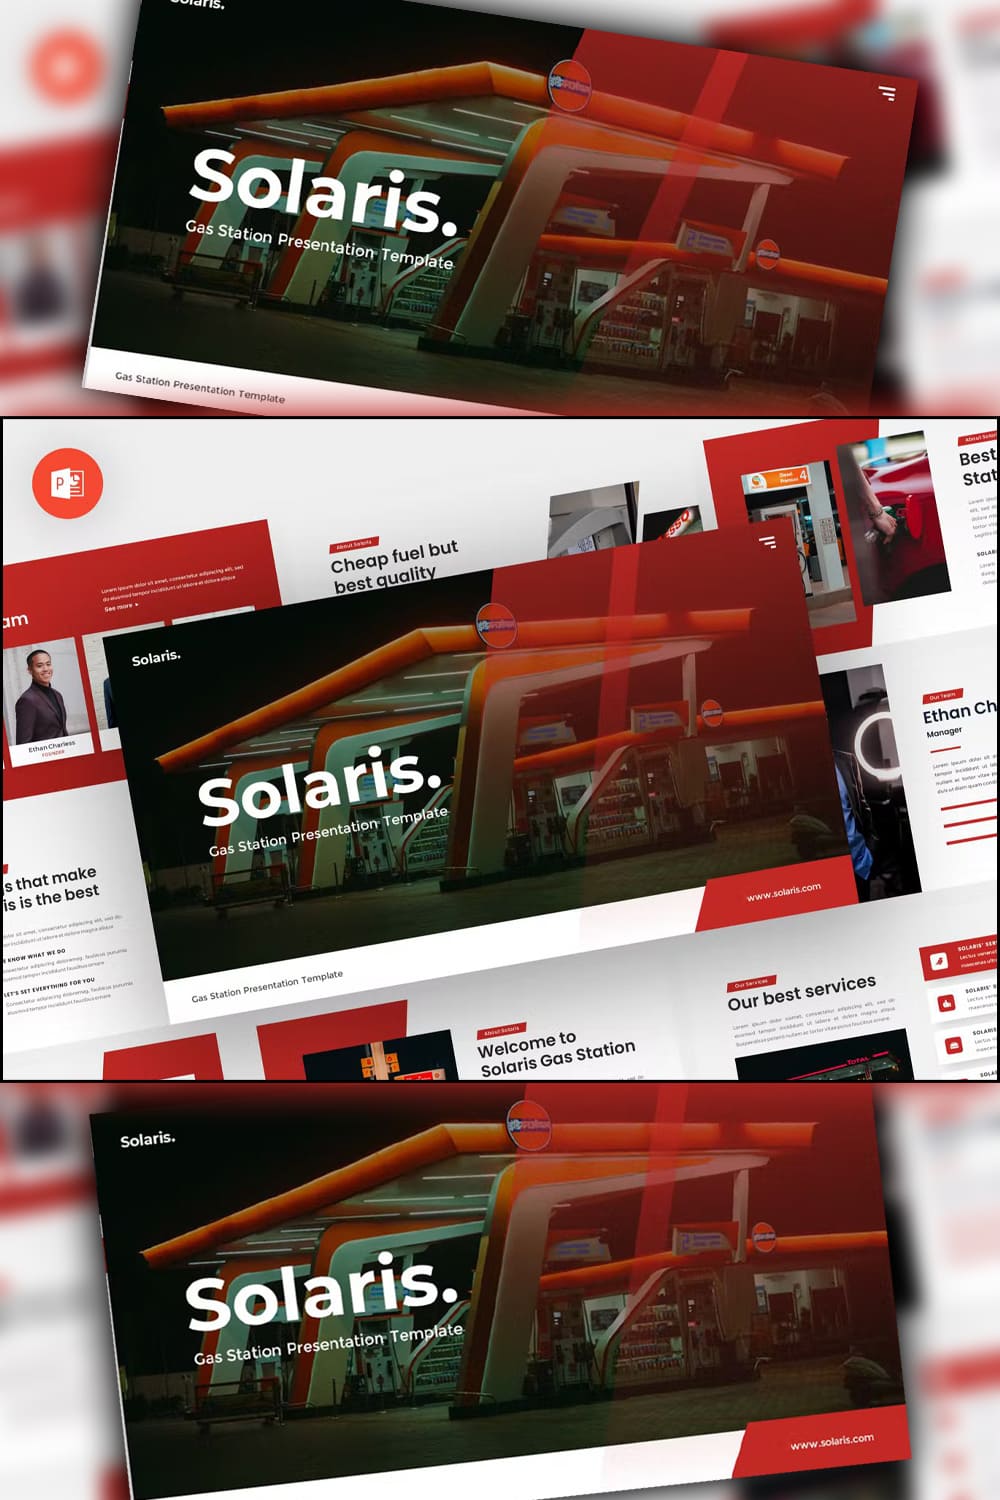 Solaris gas station powerpoint template - pinterest image preview.